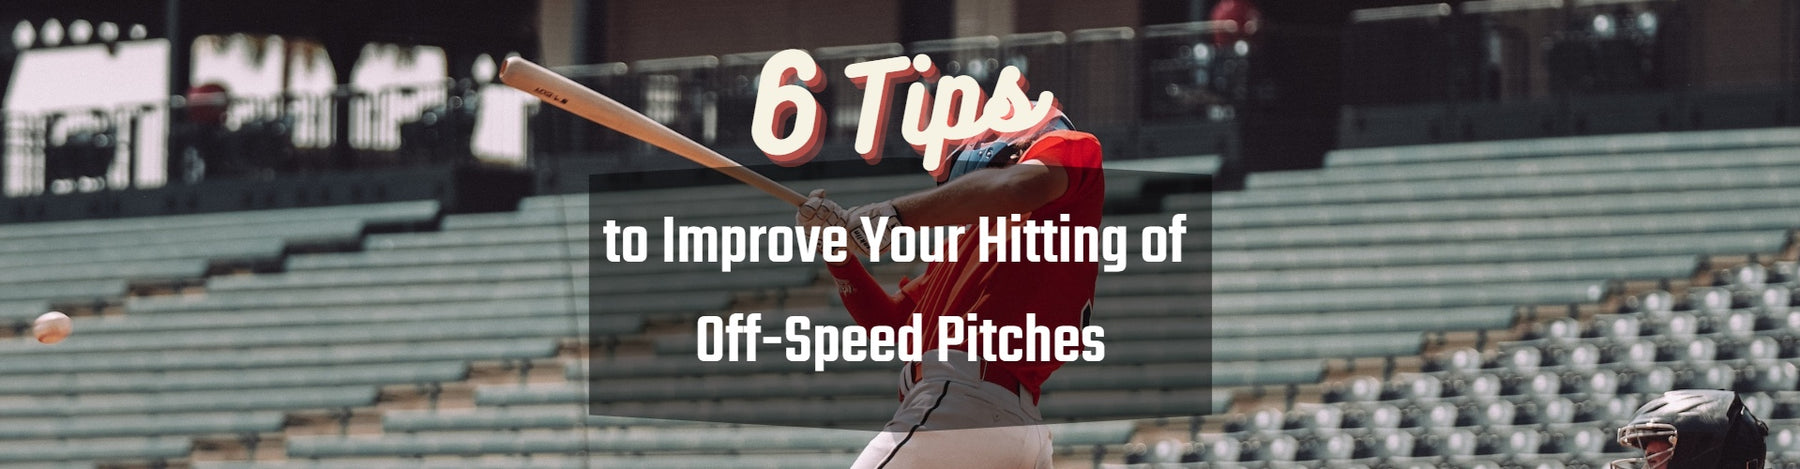 6 Tips to Improve Your Hitting of Off-Speed Pitches